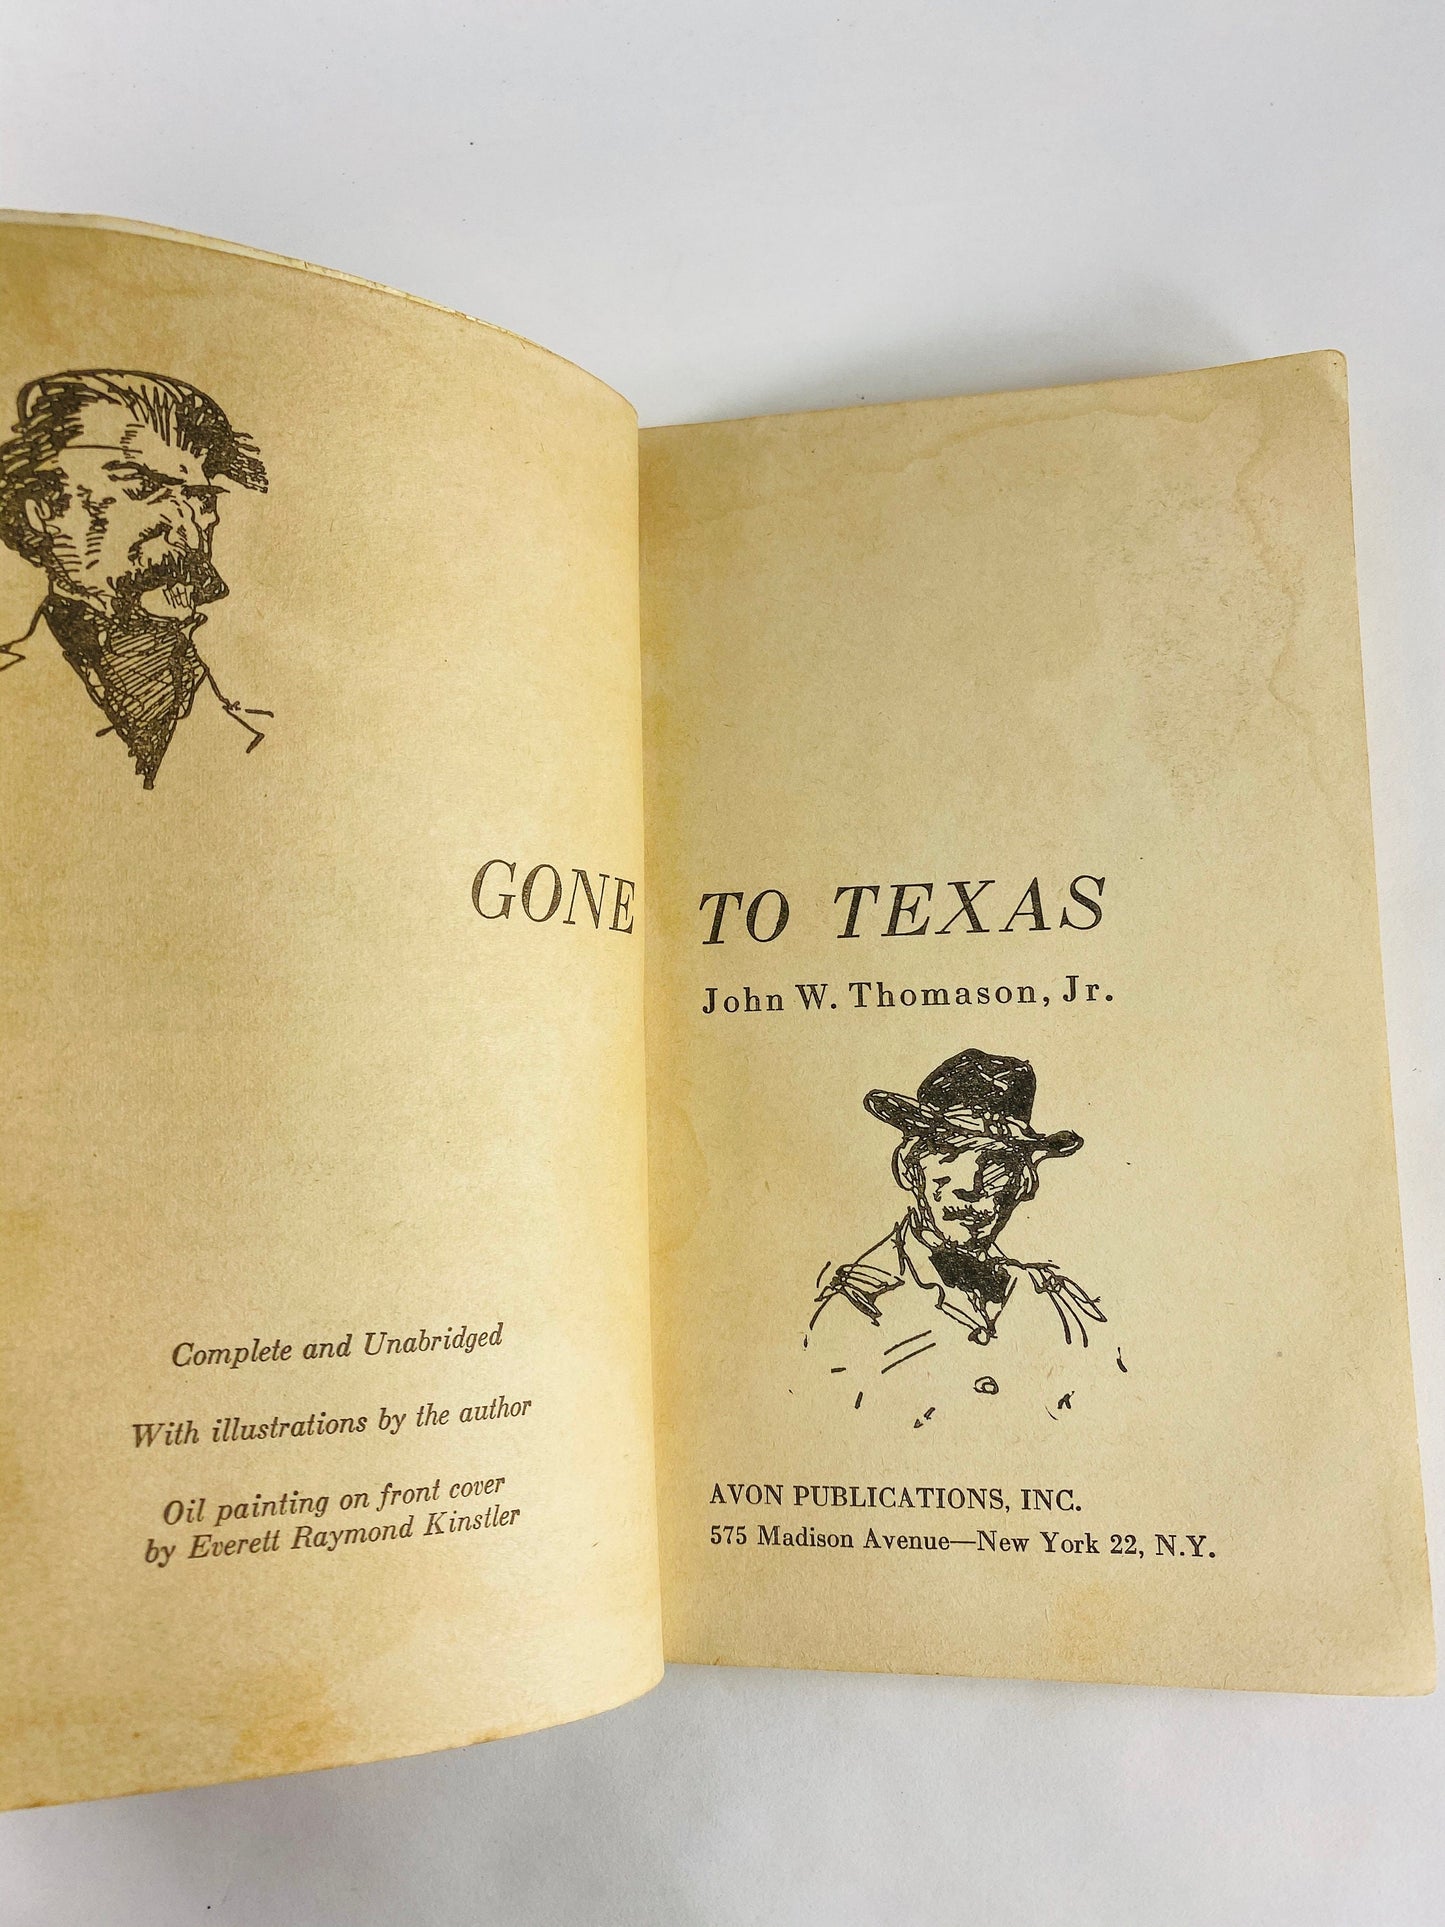 1953 Gone to Texas by John W Thomason. Vintage Avon Western paperback fictional book about the aftermath of the Civil War. American history